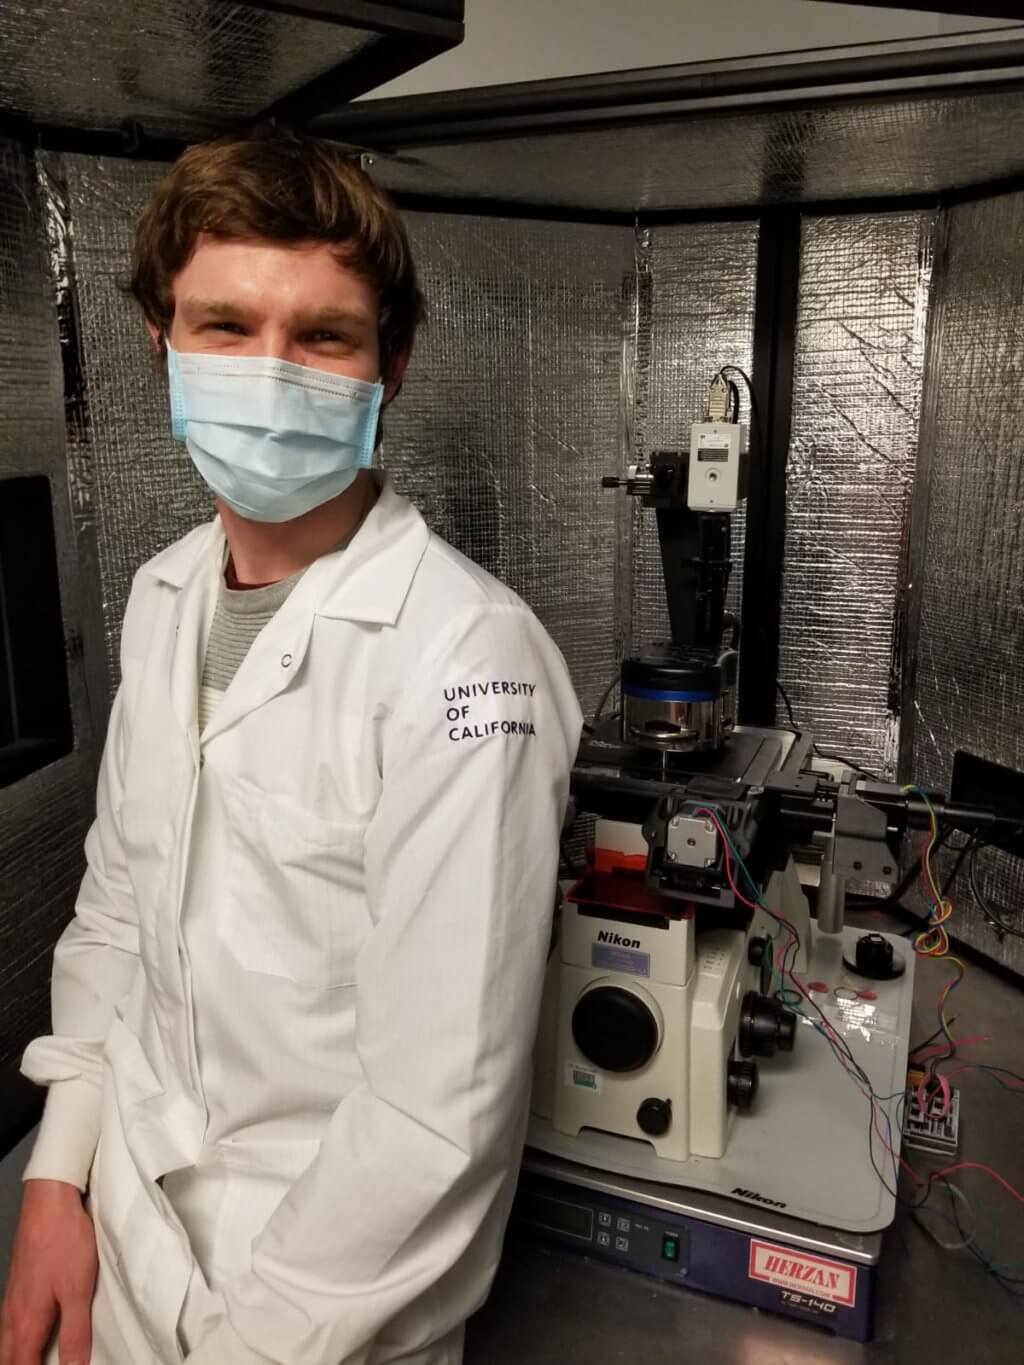 Connor next to lab equipment